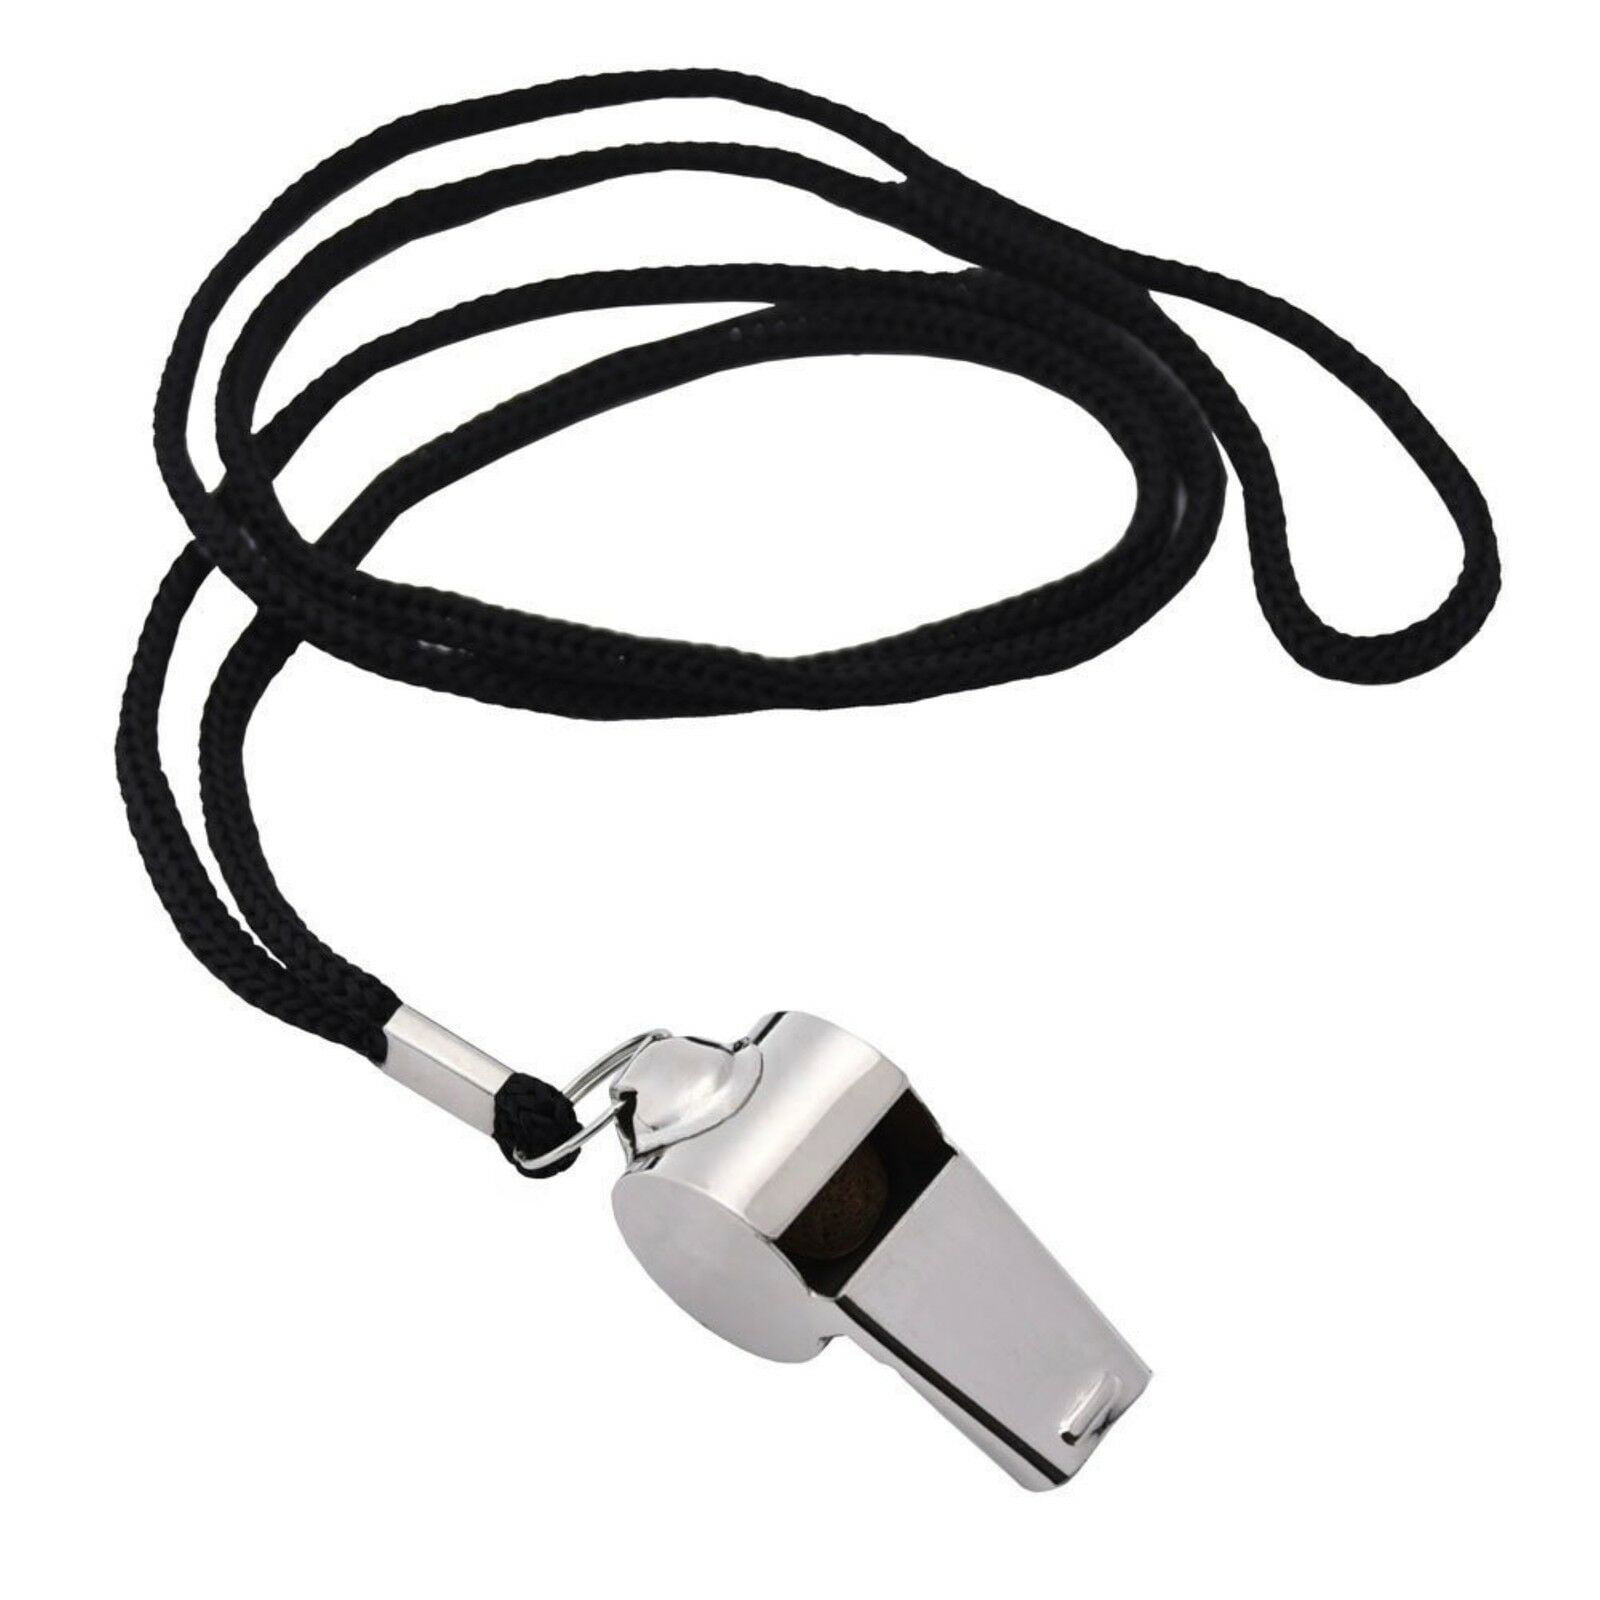 Party's 1 Metal Whistle & Lanyard Emergency Survival 